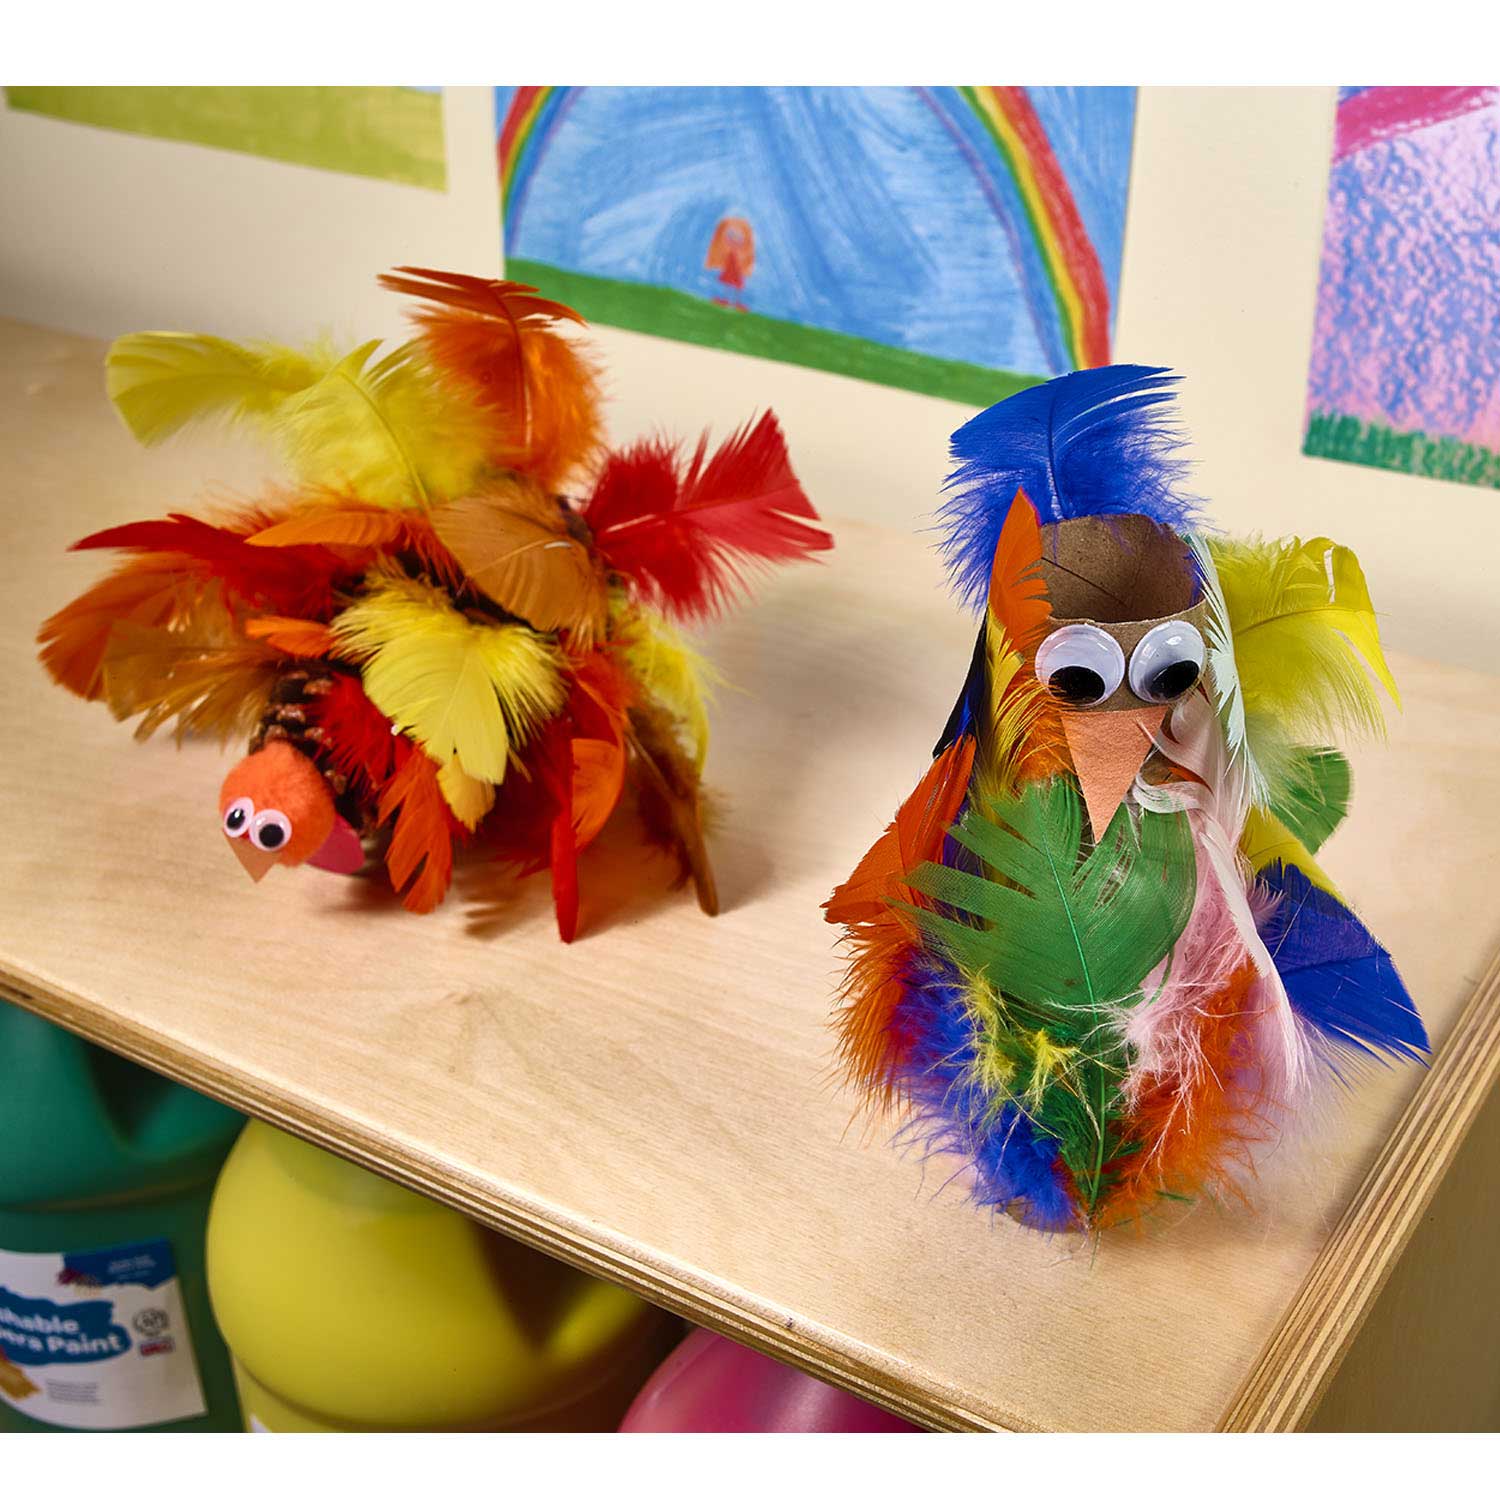 Artful Goods® Feathers, Hot Colors